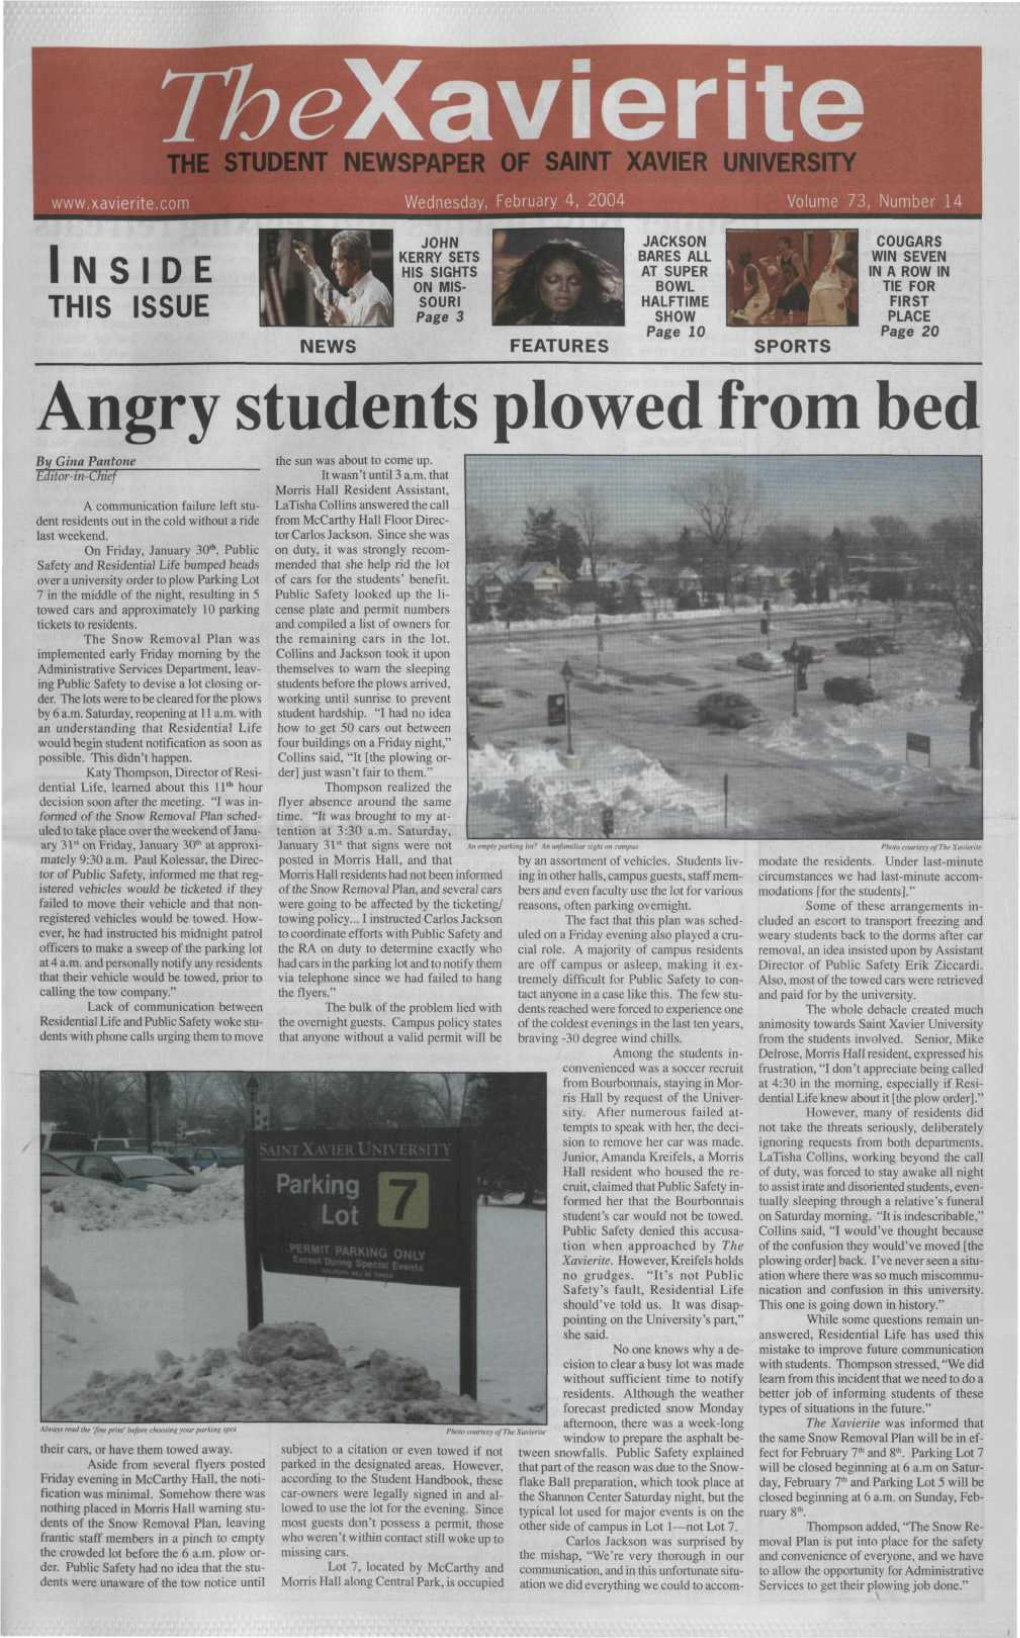 Angry Students Plowed from Bed by Gina Pantone the Sun Was About to Come Up